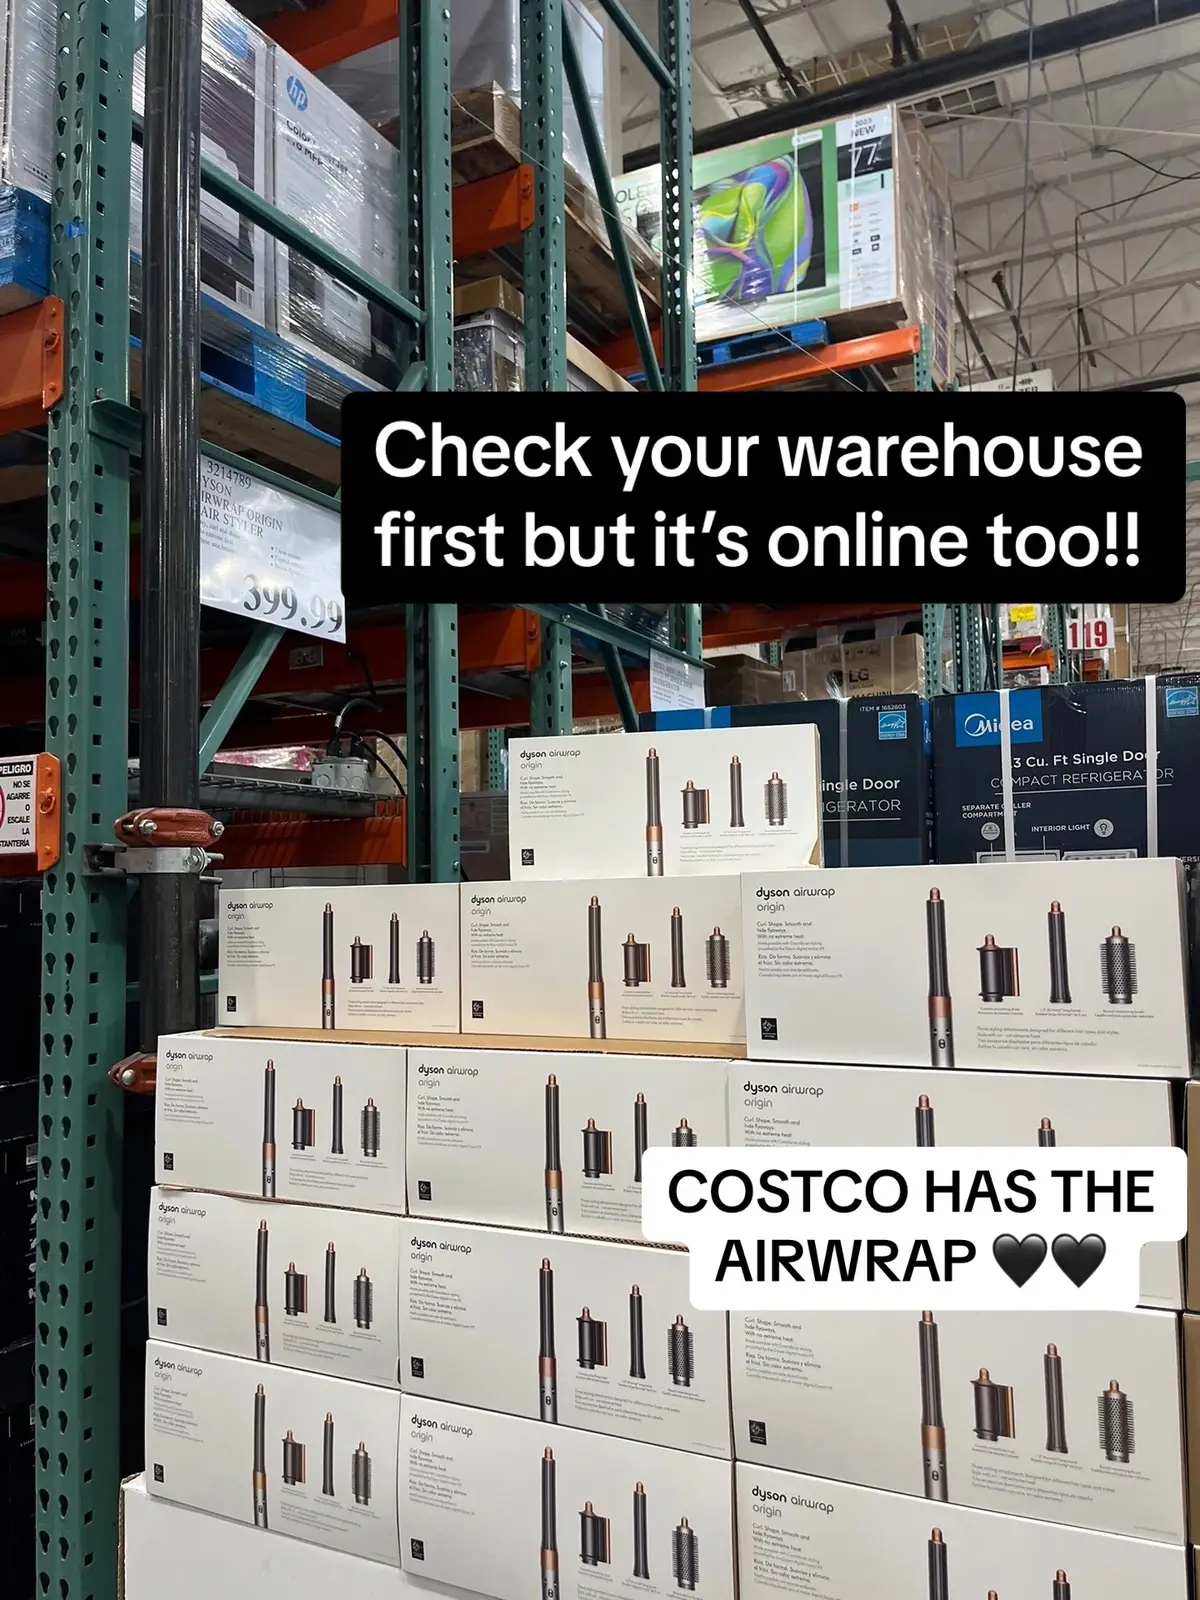 Run to costco!!! You can check stock online! #costcofinds #costco #dyson #dysonairwrap #dysonairwrapcostco 